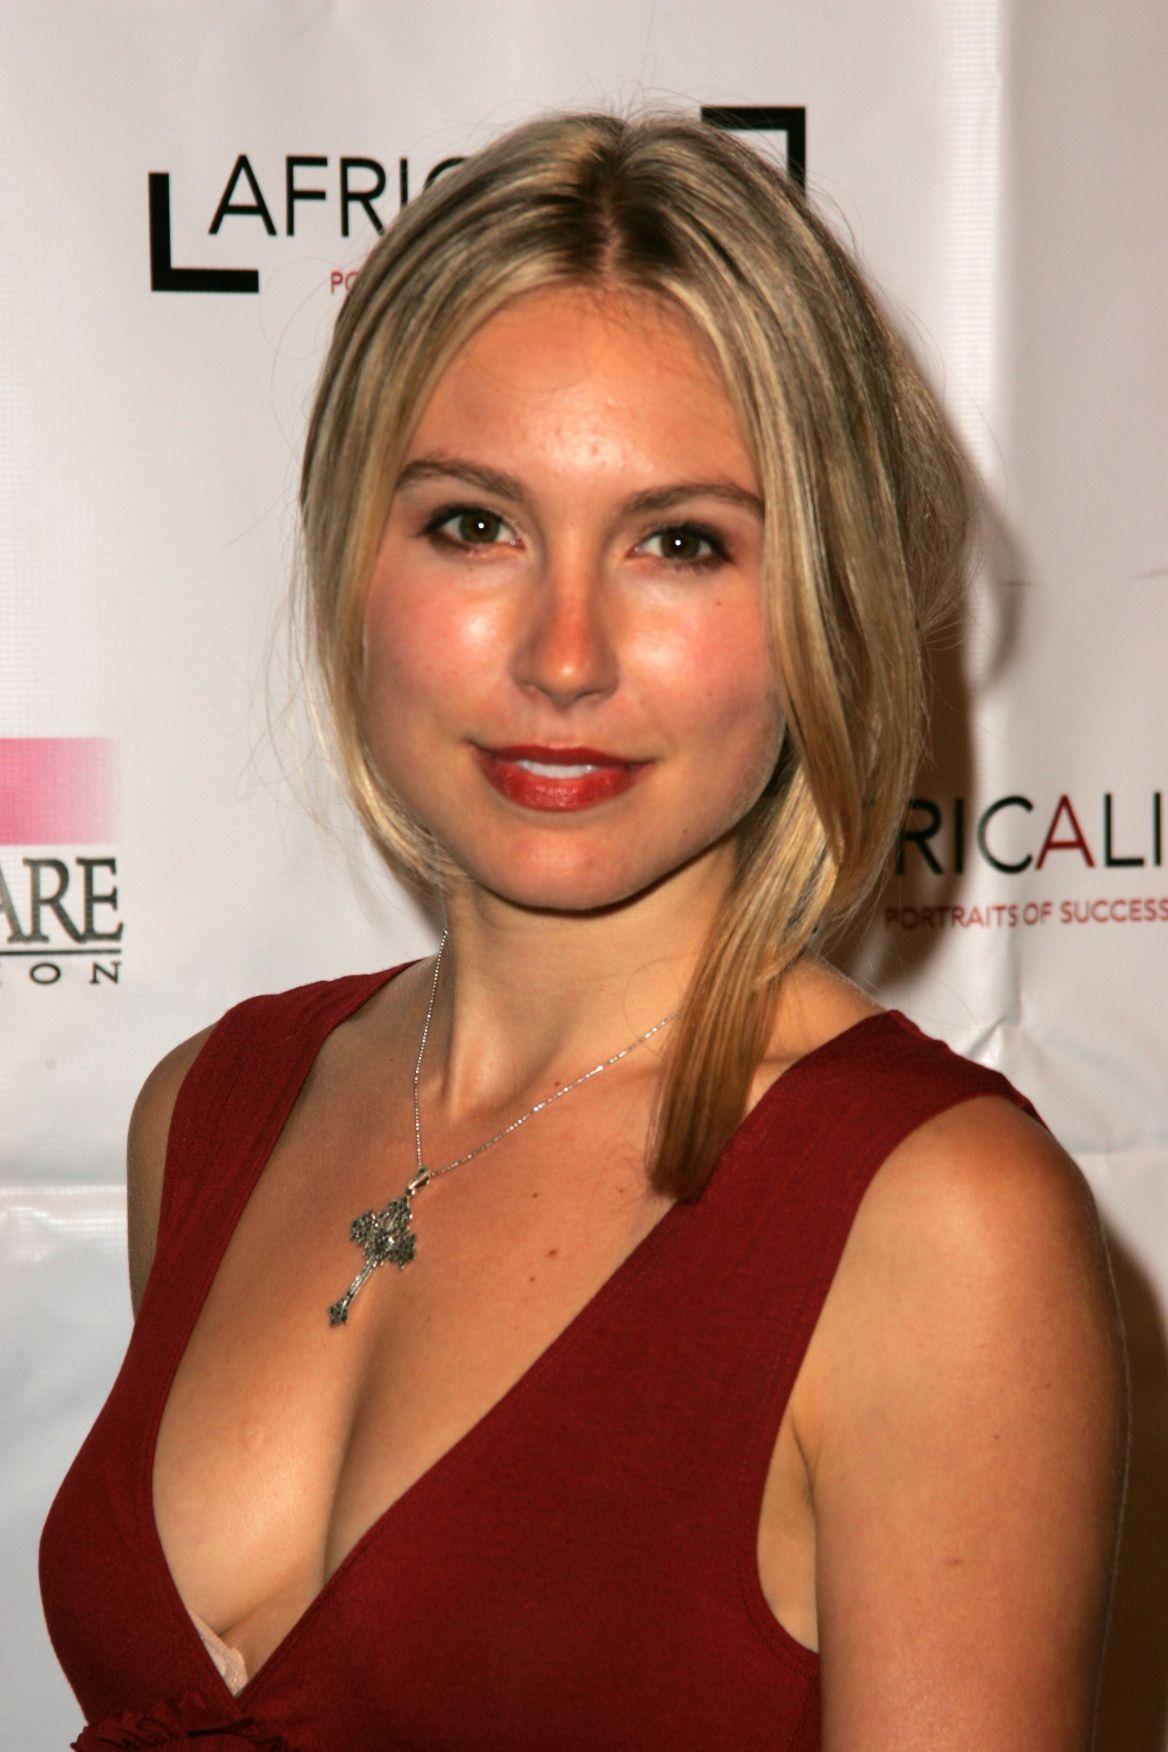 1000+ images about Sarah Carter on Pinterest Actresses, For her and Photos....